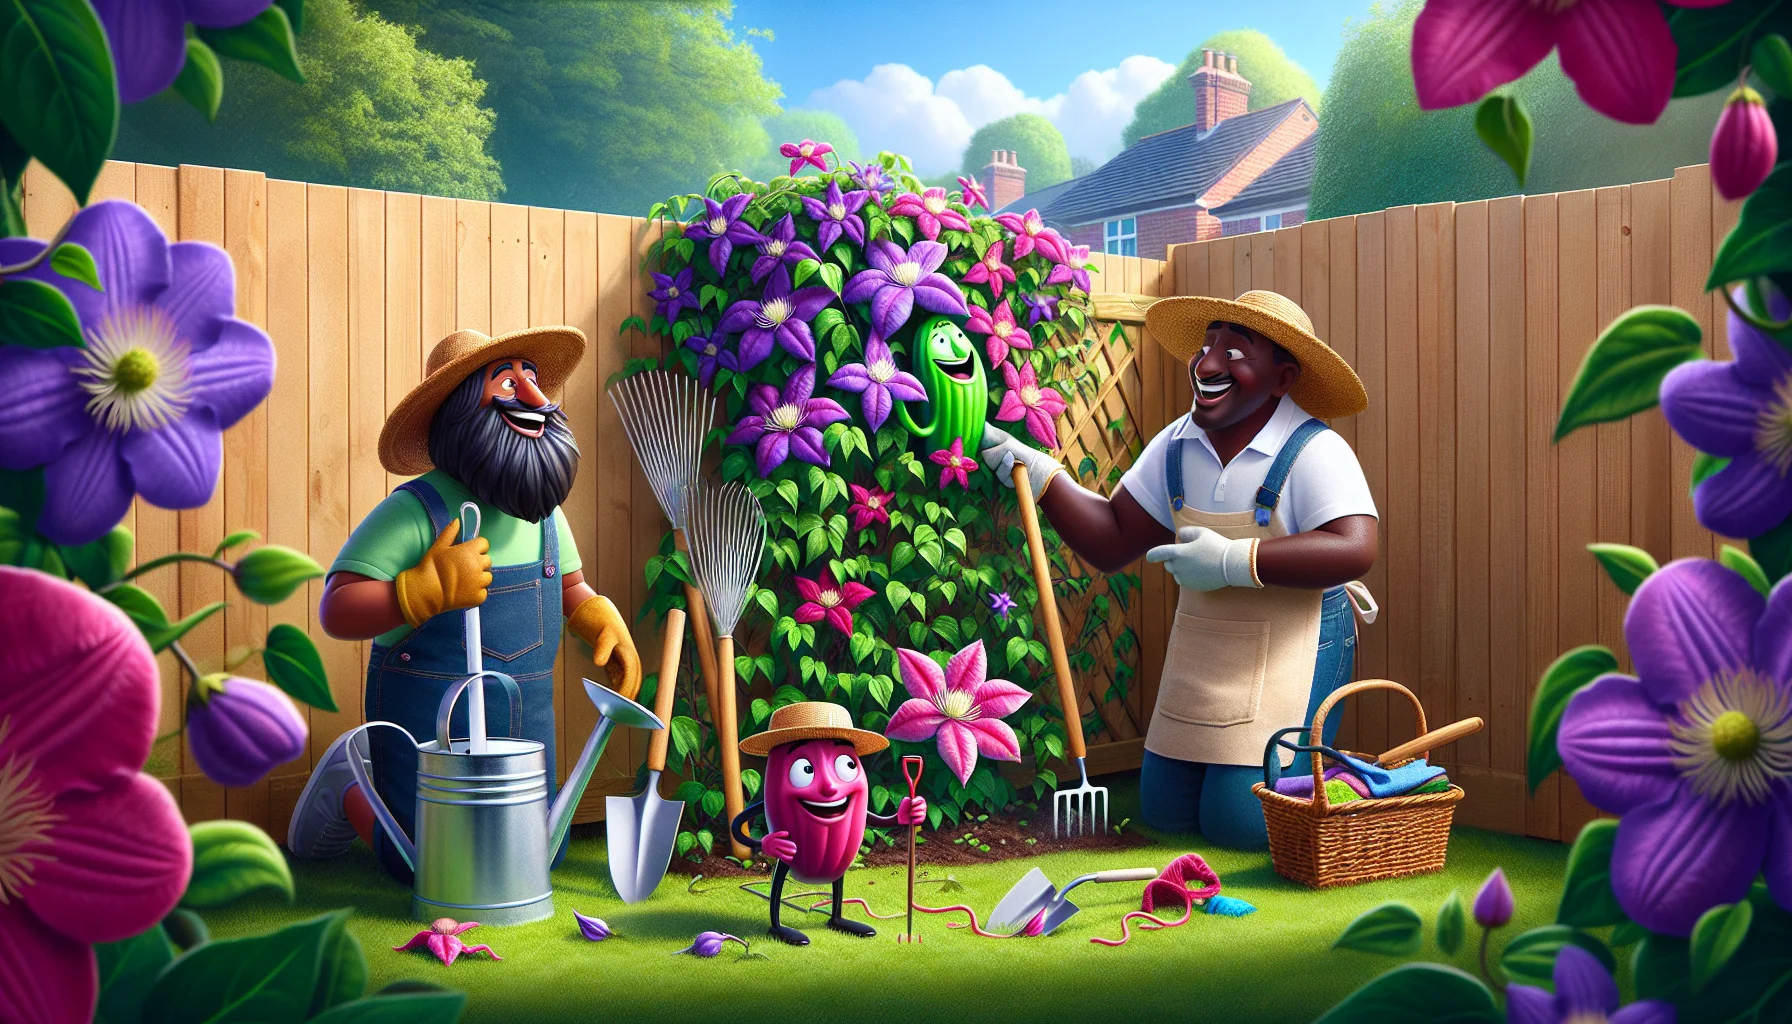 Show a whimsical scene engaging the viewer with the joy of gardening. In a suburban backyard, a robust clematis vine unfolds its vibrant purple and pink flowers, sprawling over a carefully manicured wooden fence. The air is filled with a soft fragrance. Lively, anthropomorphized garden tools: a rake, a watering can, and a trowel, are seen tending to the vine, adorning straw hats and bandanas. They enthusiastically encourage a South Asian woman and a Black man, who are portrayed expressively laughing, enchanted by the playful scenario and clearly captivated by the gardening process.